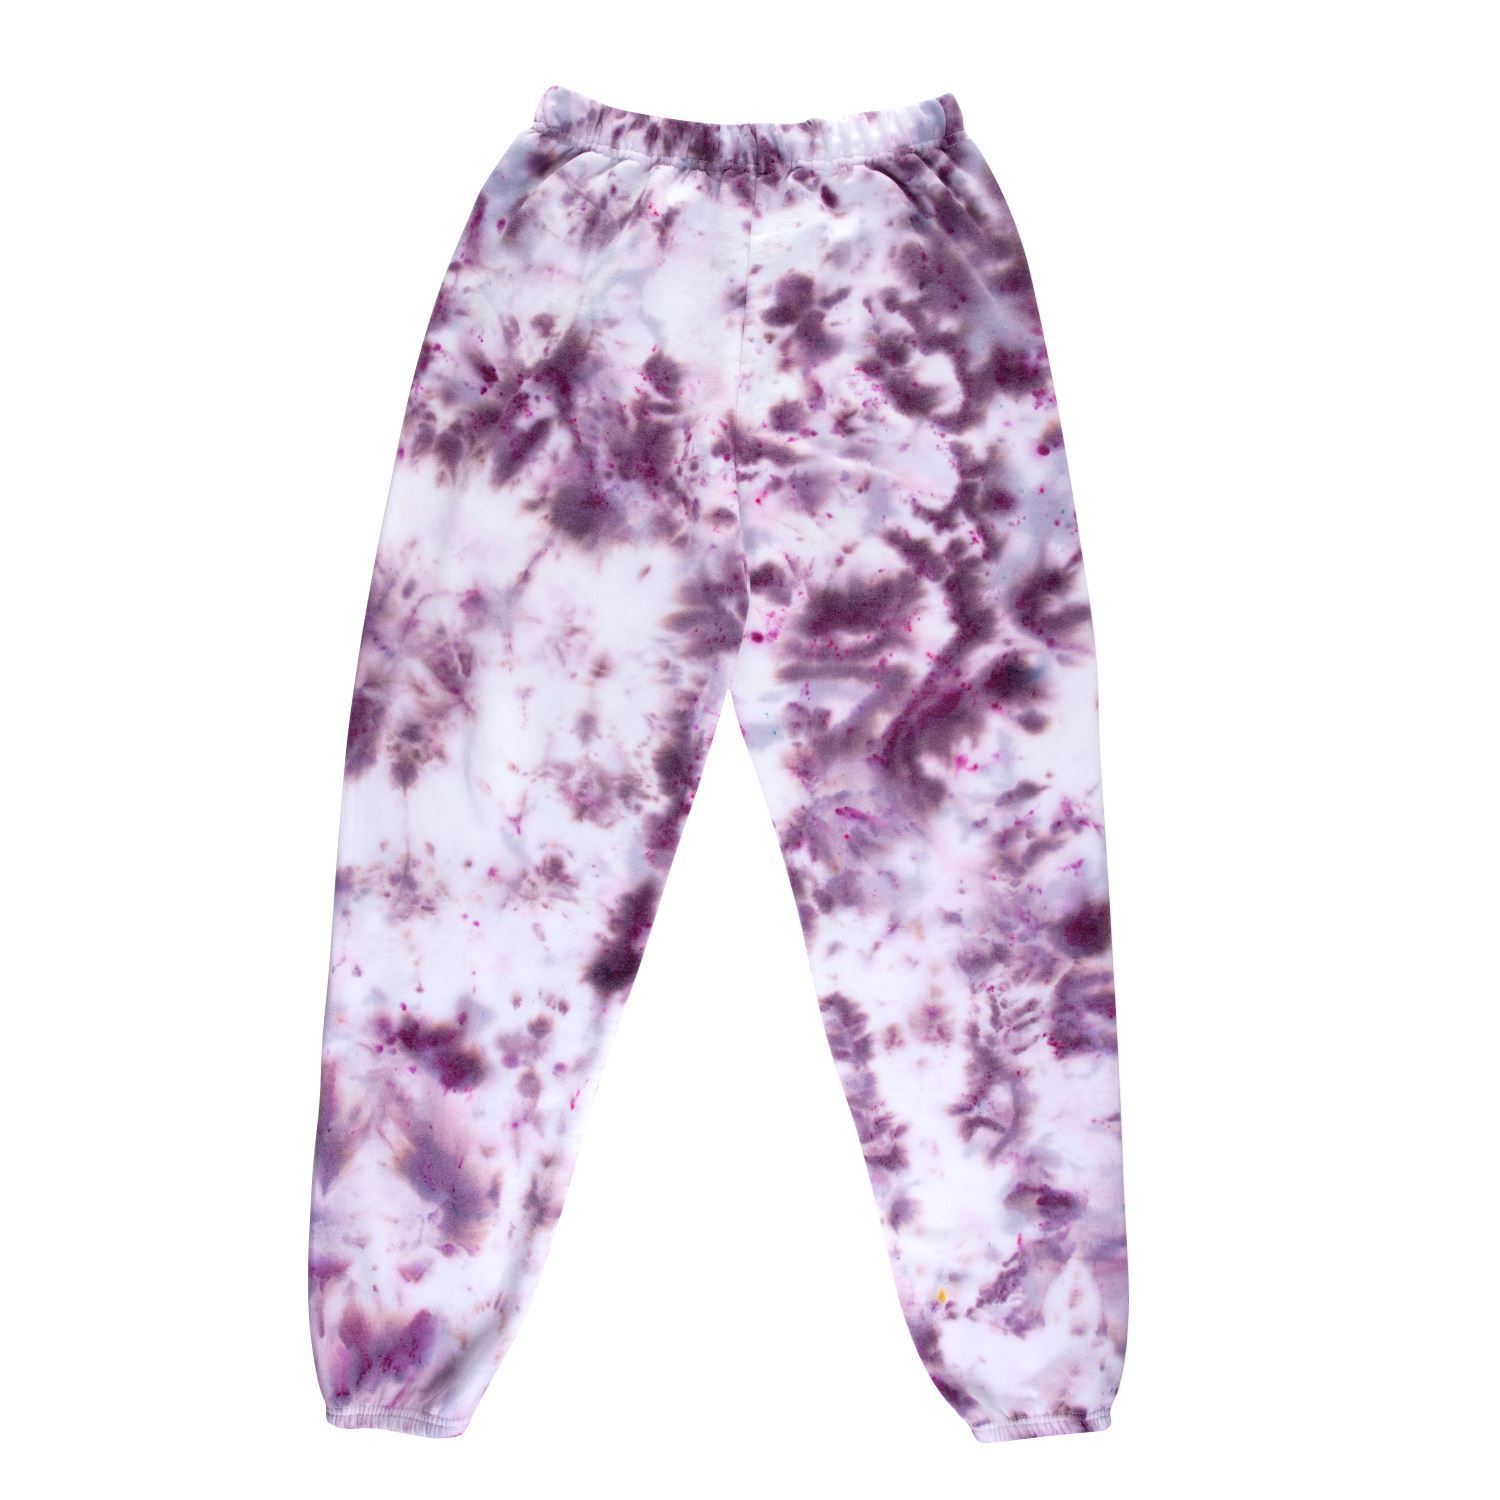 Adult White Sweatpants Large | Tie Dye Your Summer